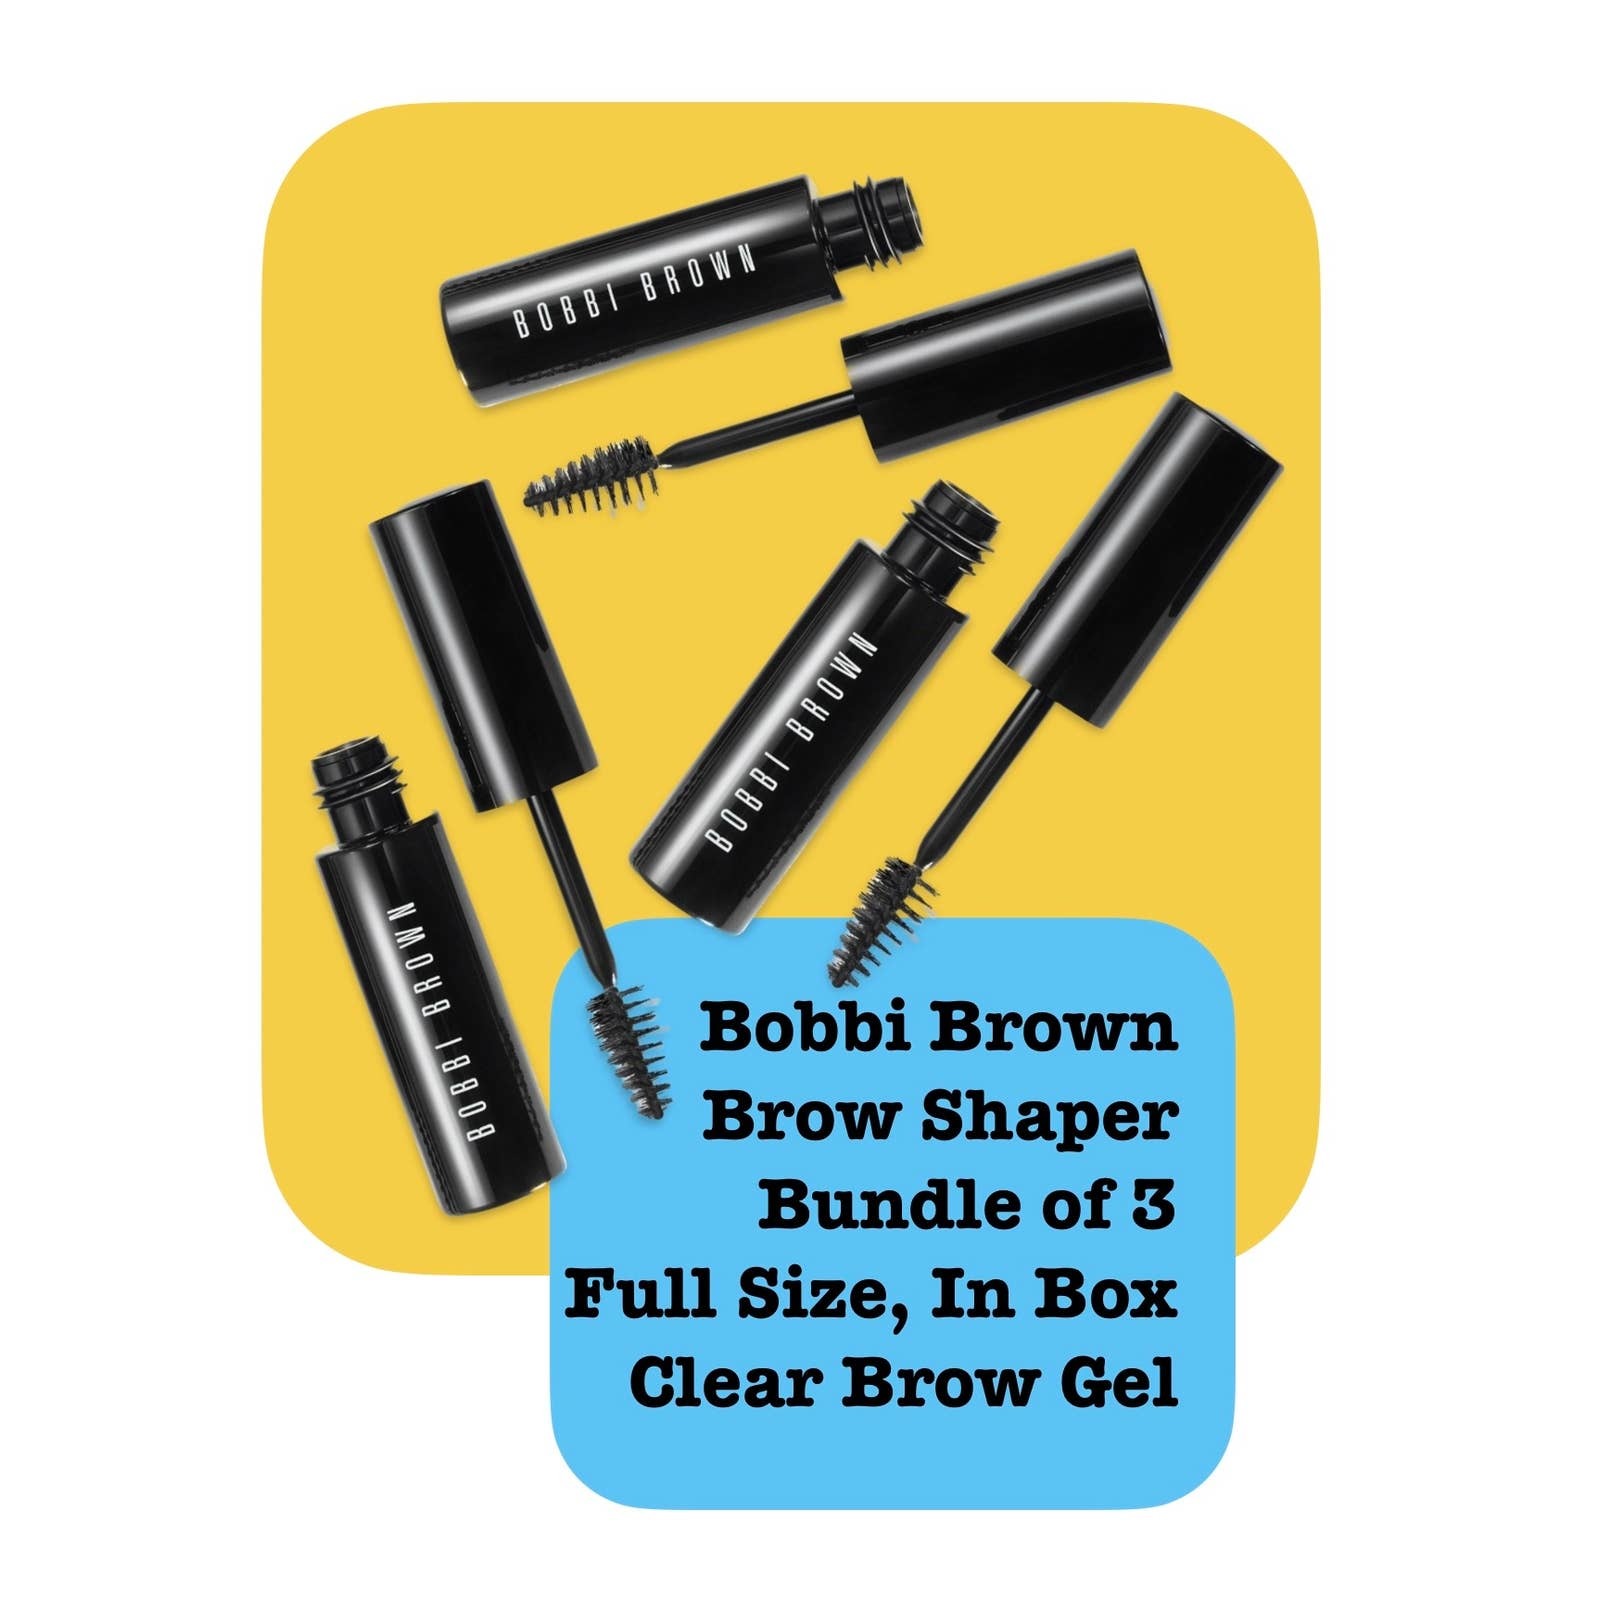 Bobbi Brown Clear Brow Gel | Pack of 3 | Full Size | New in Box - $25.00